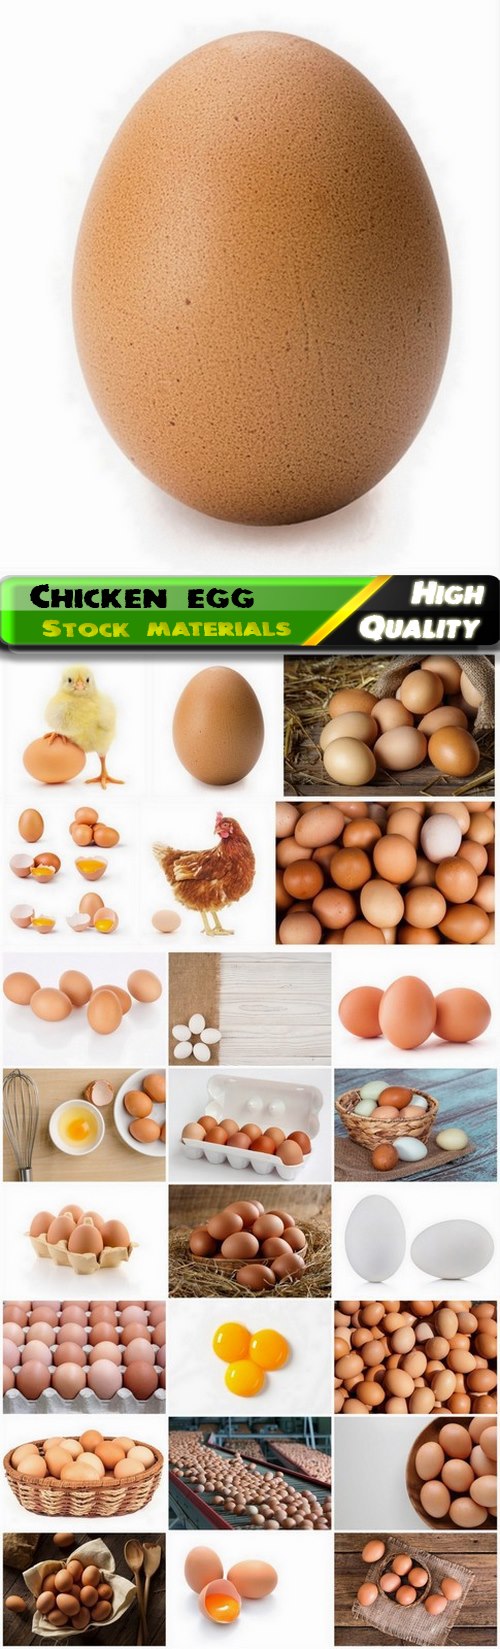 Chicken white and brown egg with yolk 25 HQ Jpg